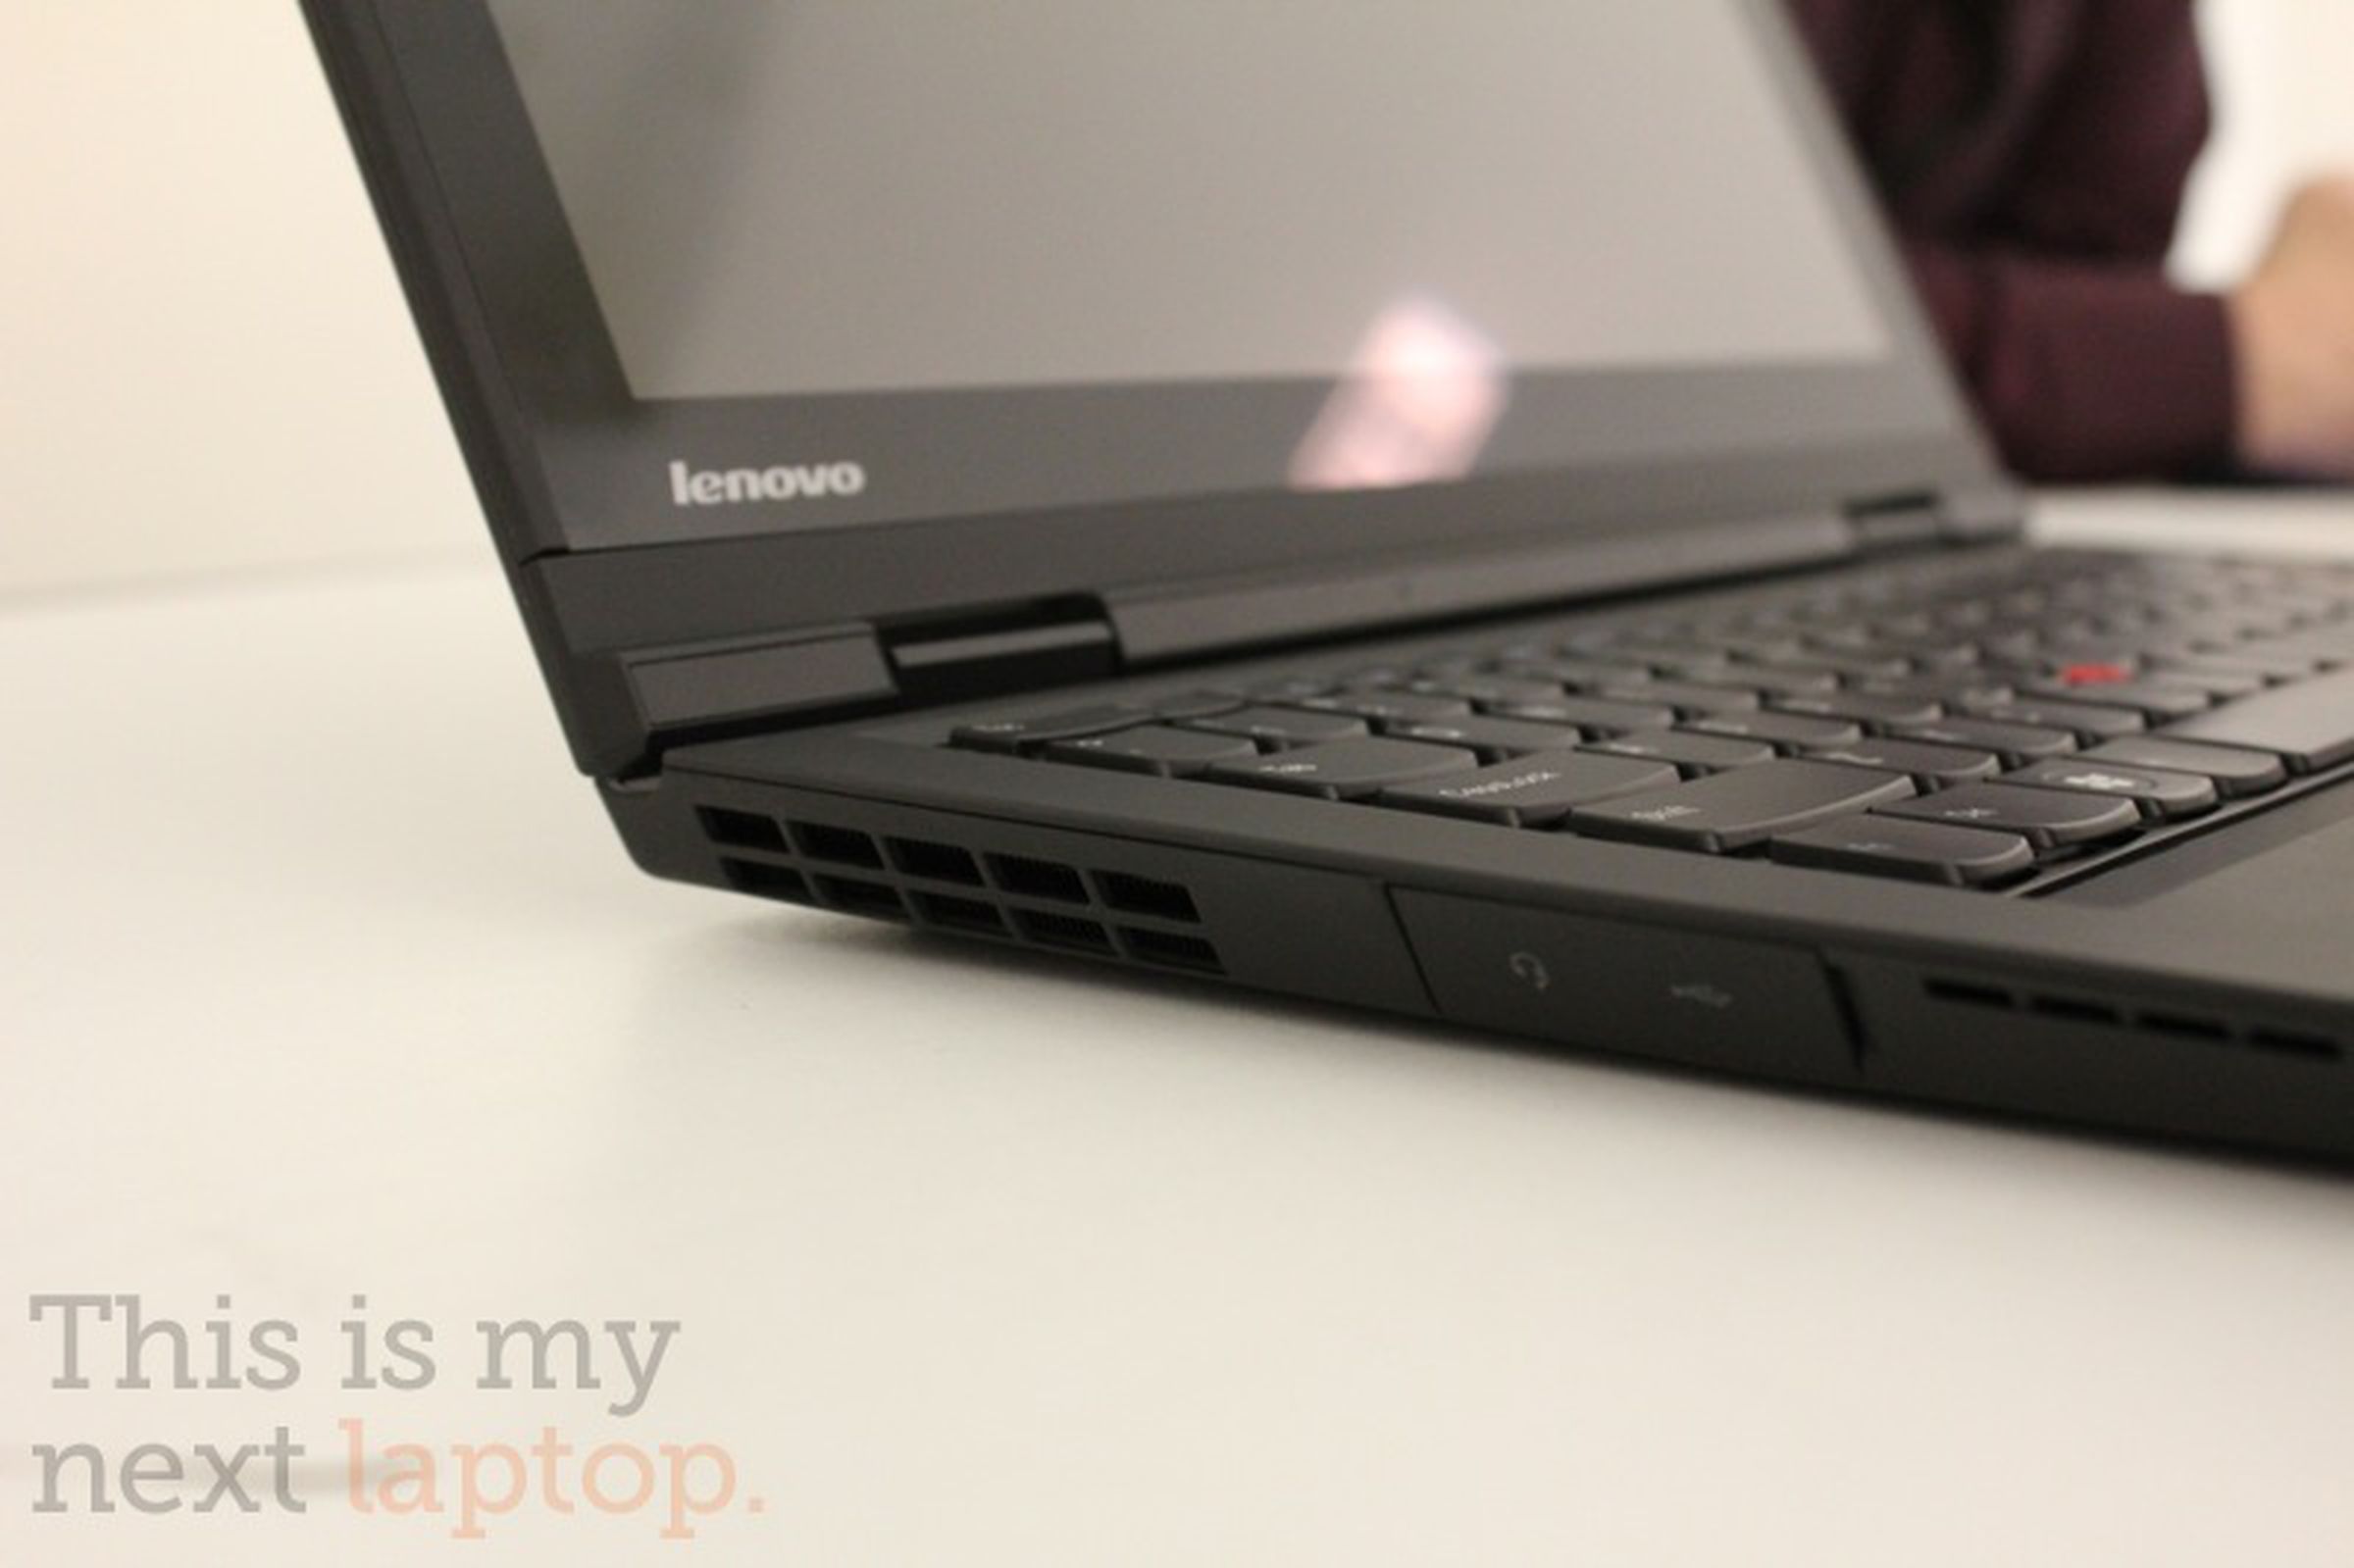 Lenovo ThinkPad X1 hands-on pictures